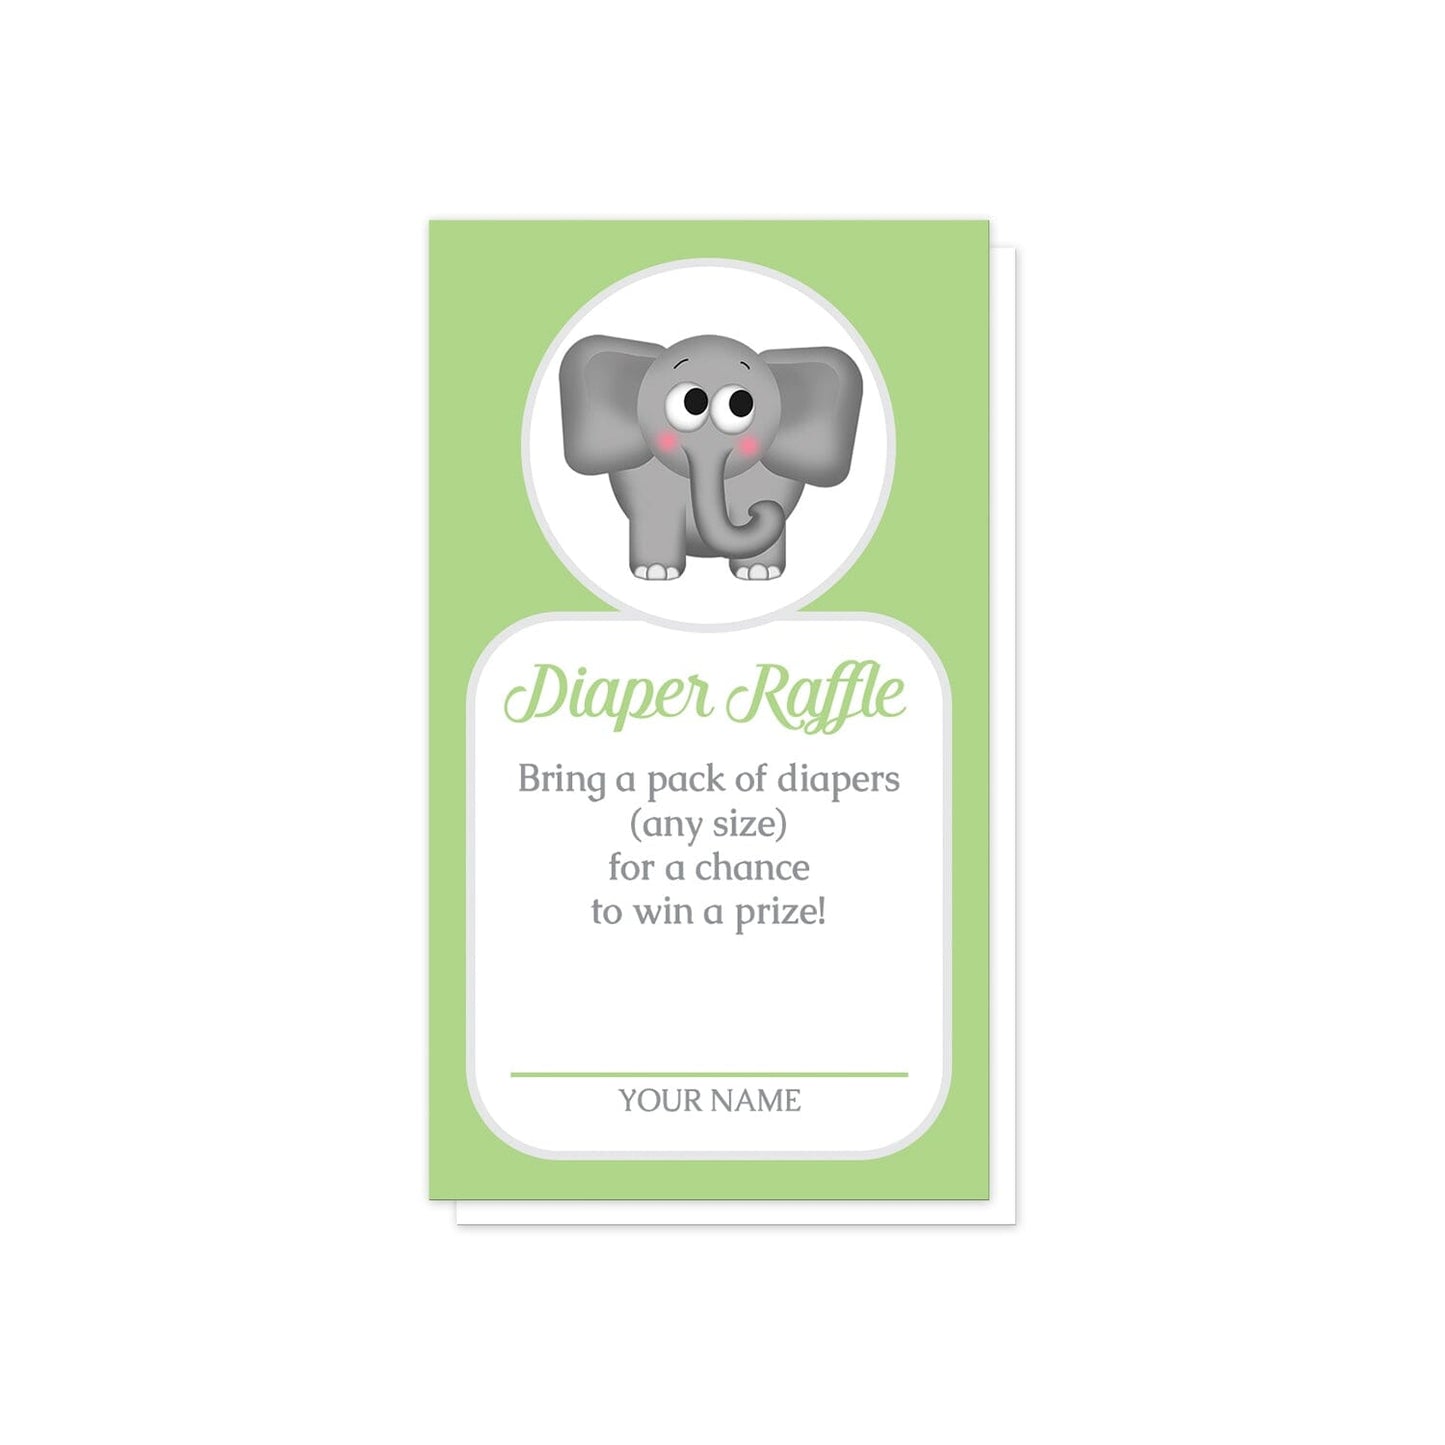 Cute Elephant Green Diaper Raffle Cards at Artistically Invited. Cute elephant green diaper raffle cards illustrated with an affectionate and adorable gray elephant in a white circle over a green background color. Your diaper raffle details are printed in green and gray in a white rectangular area below the cute little elephant.